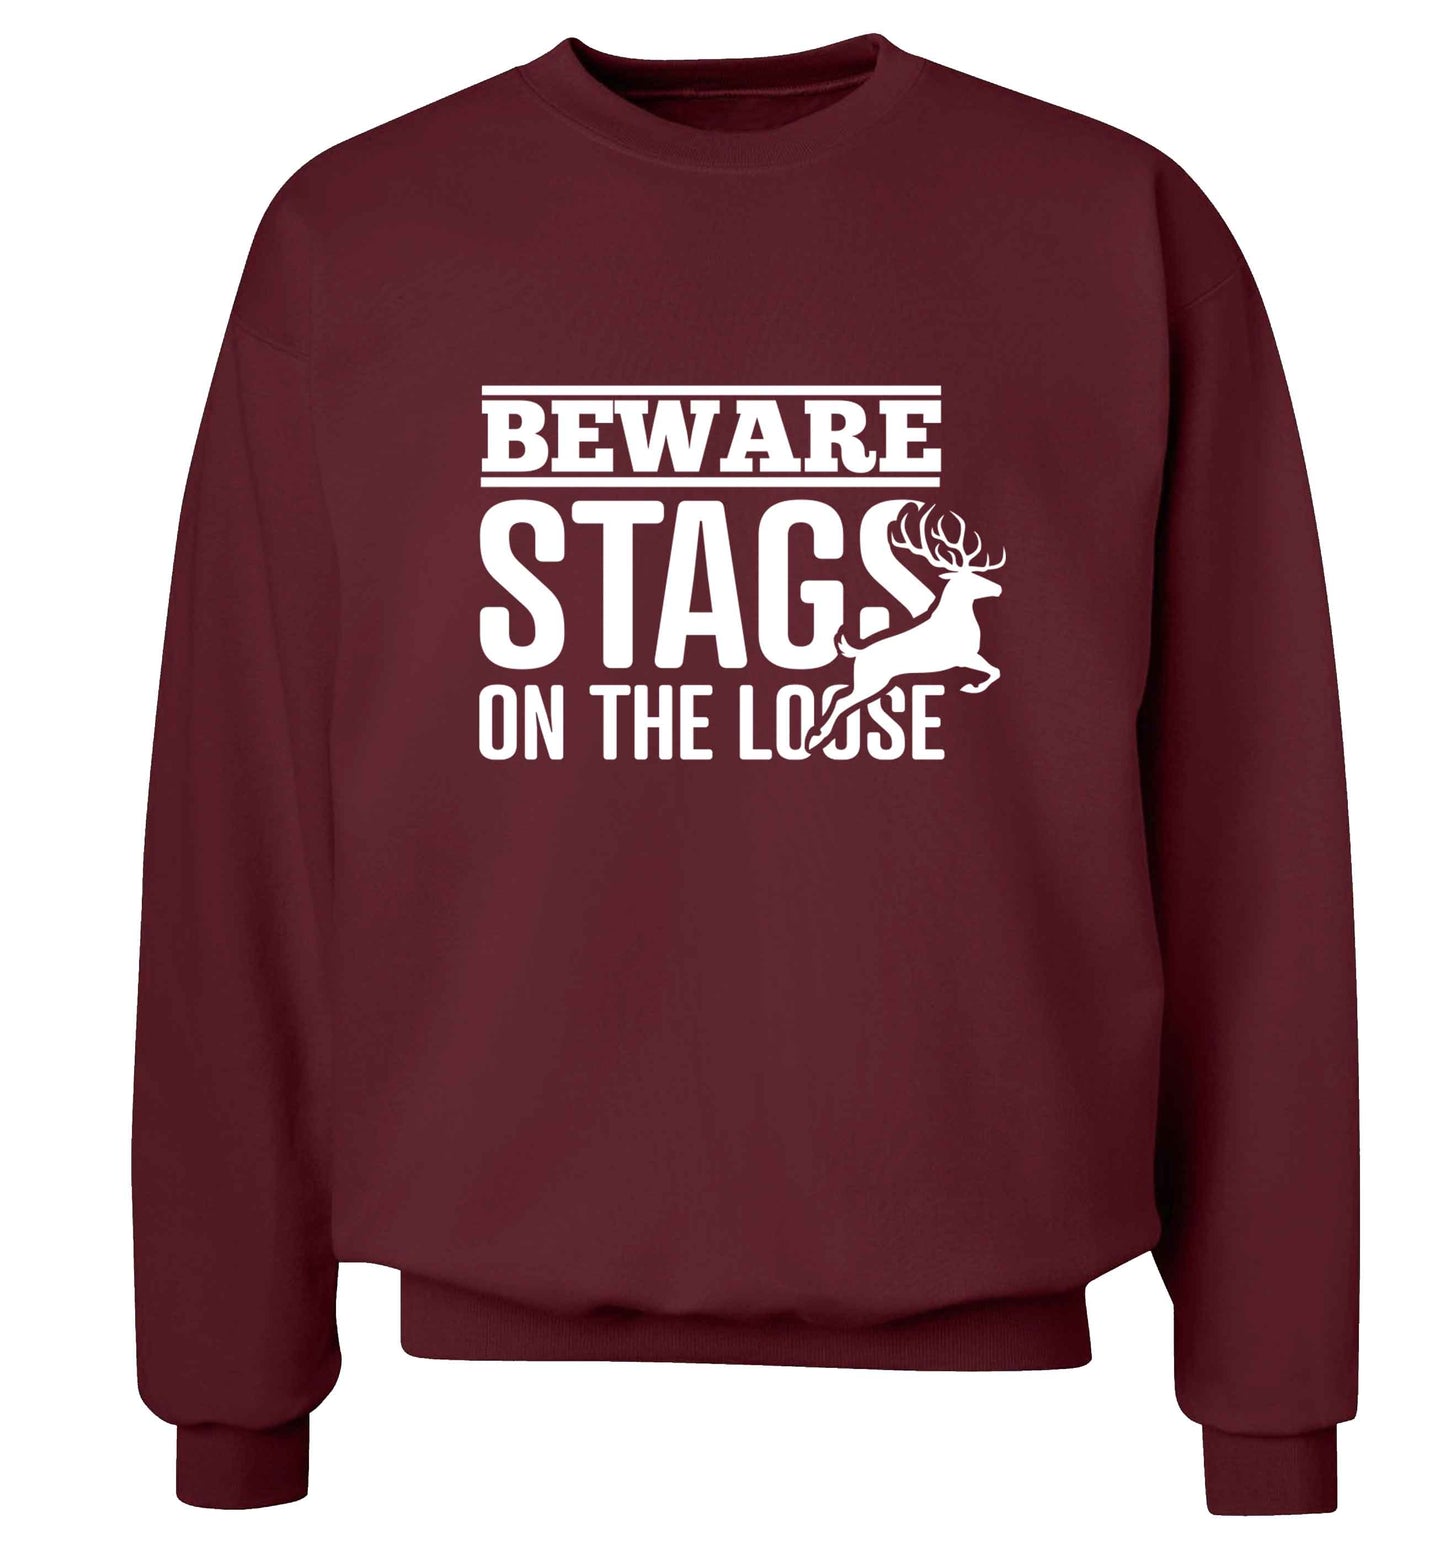 Beware stags on the loose adult's unisex maroon sweater 2XL